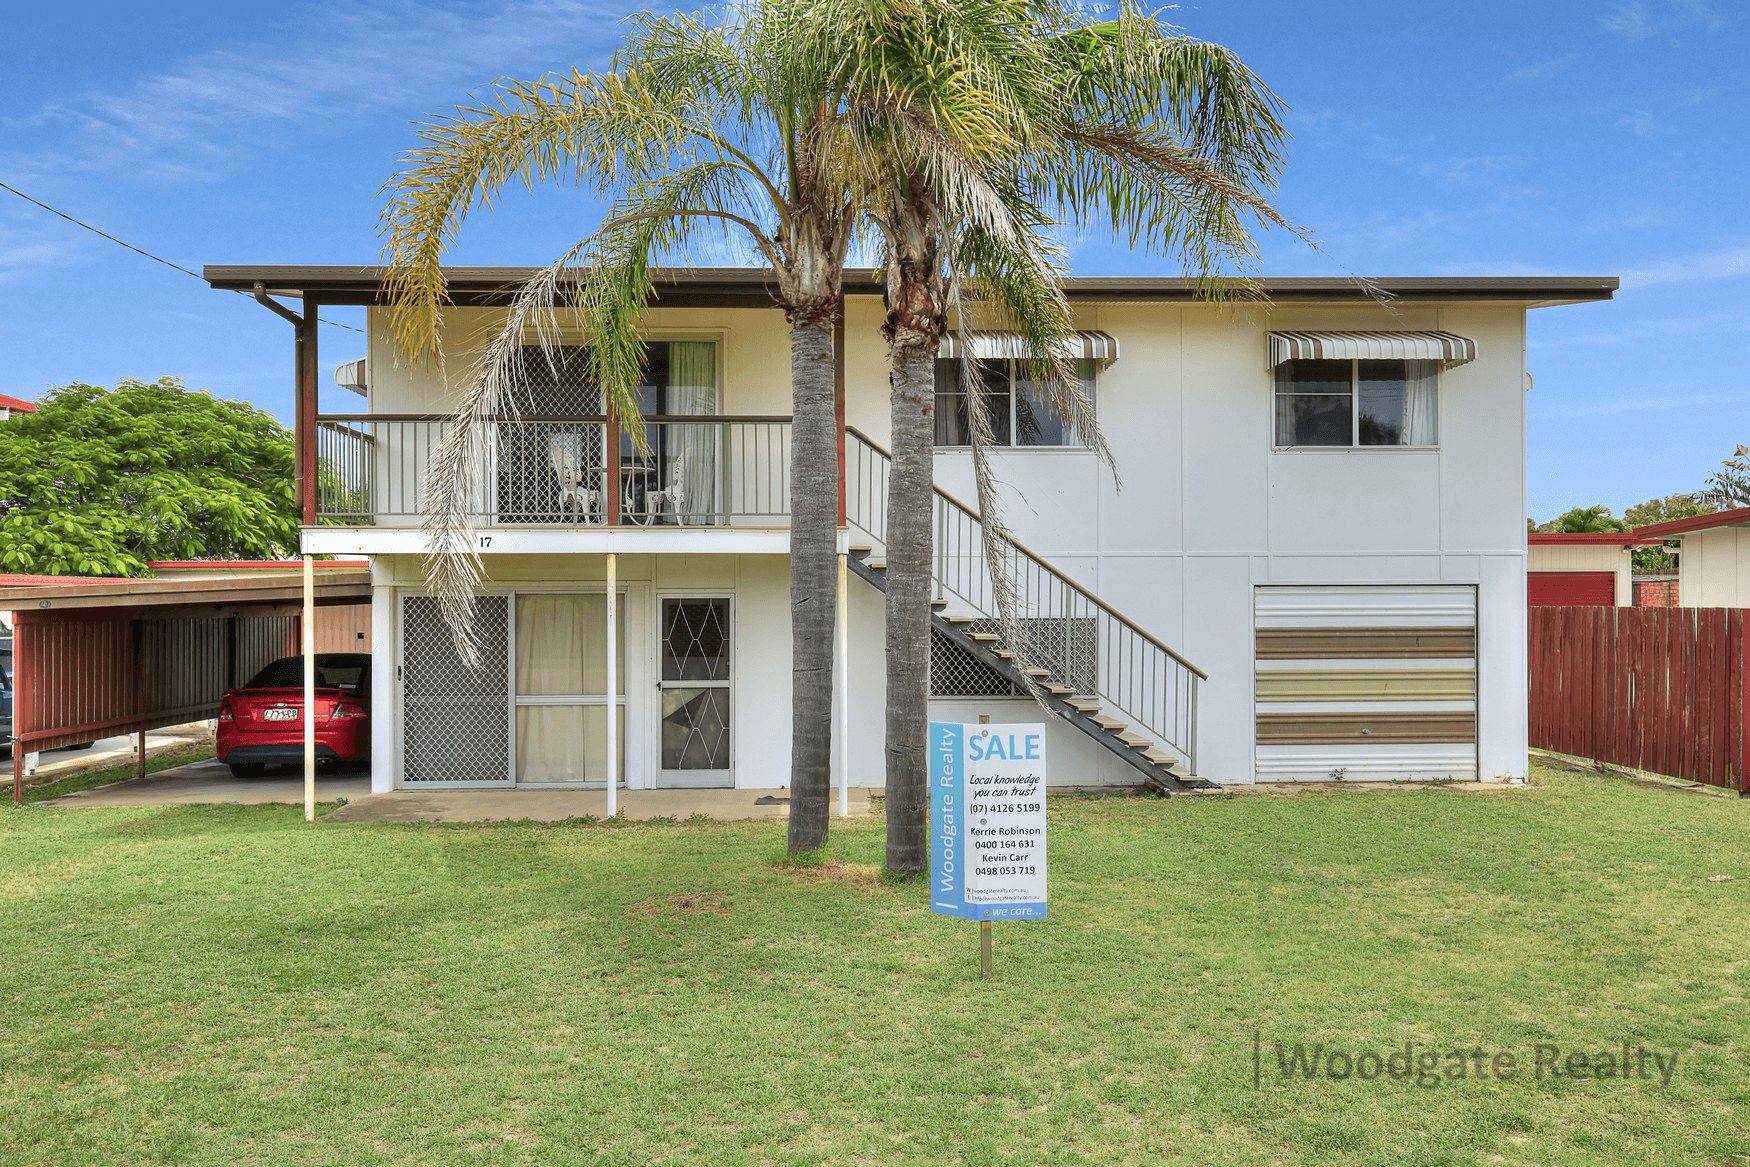 17 WHITING STREET, WOODGATE, QLD 4660